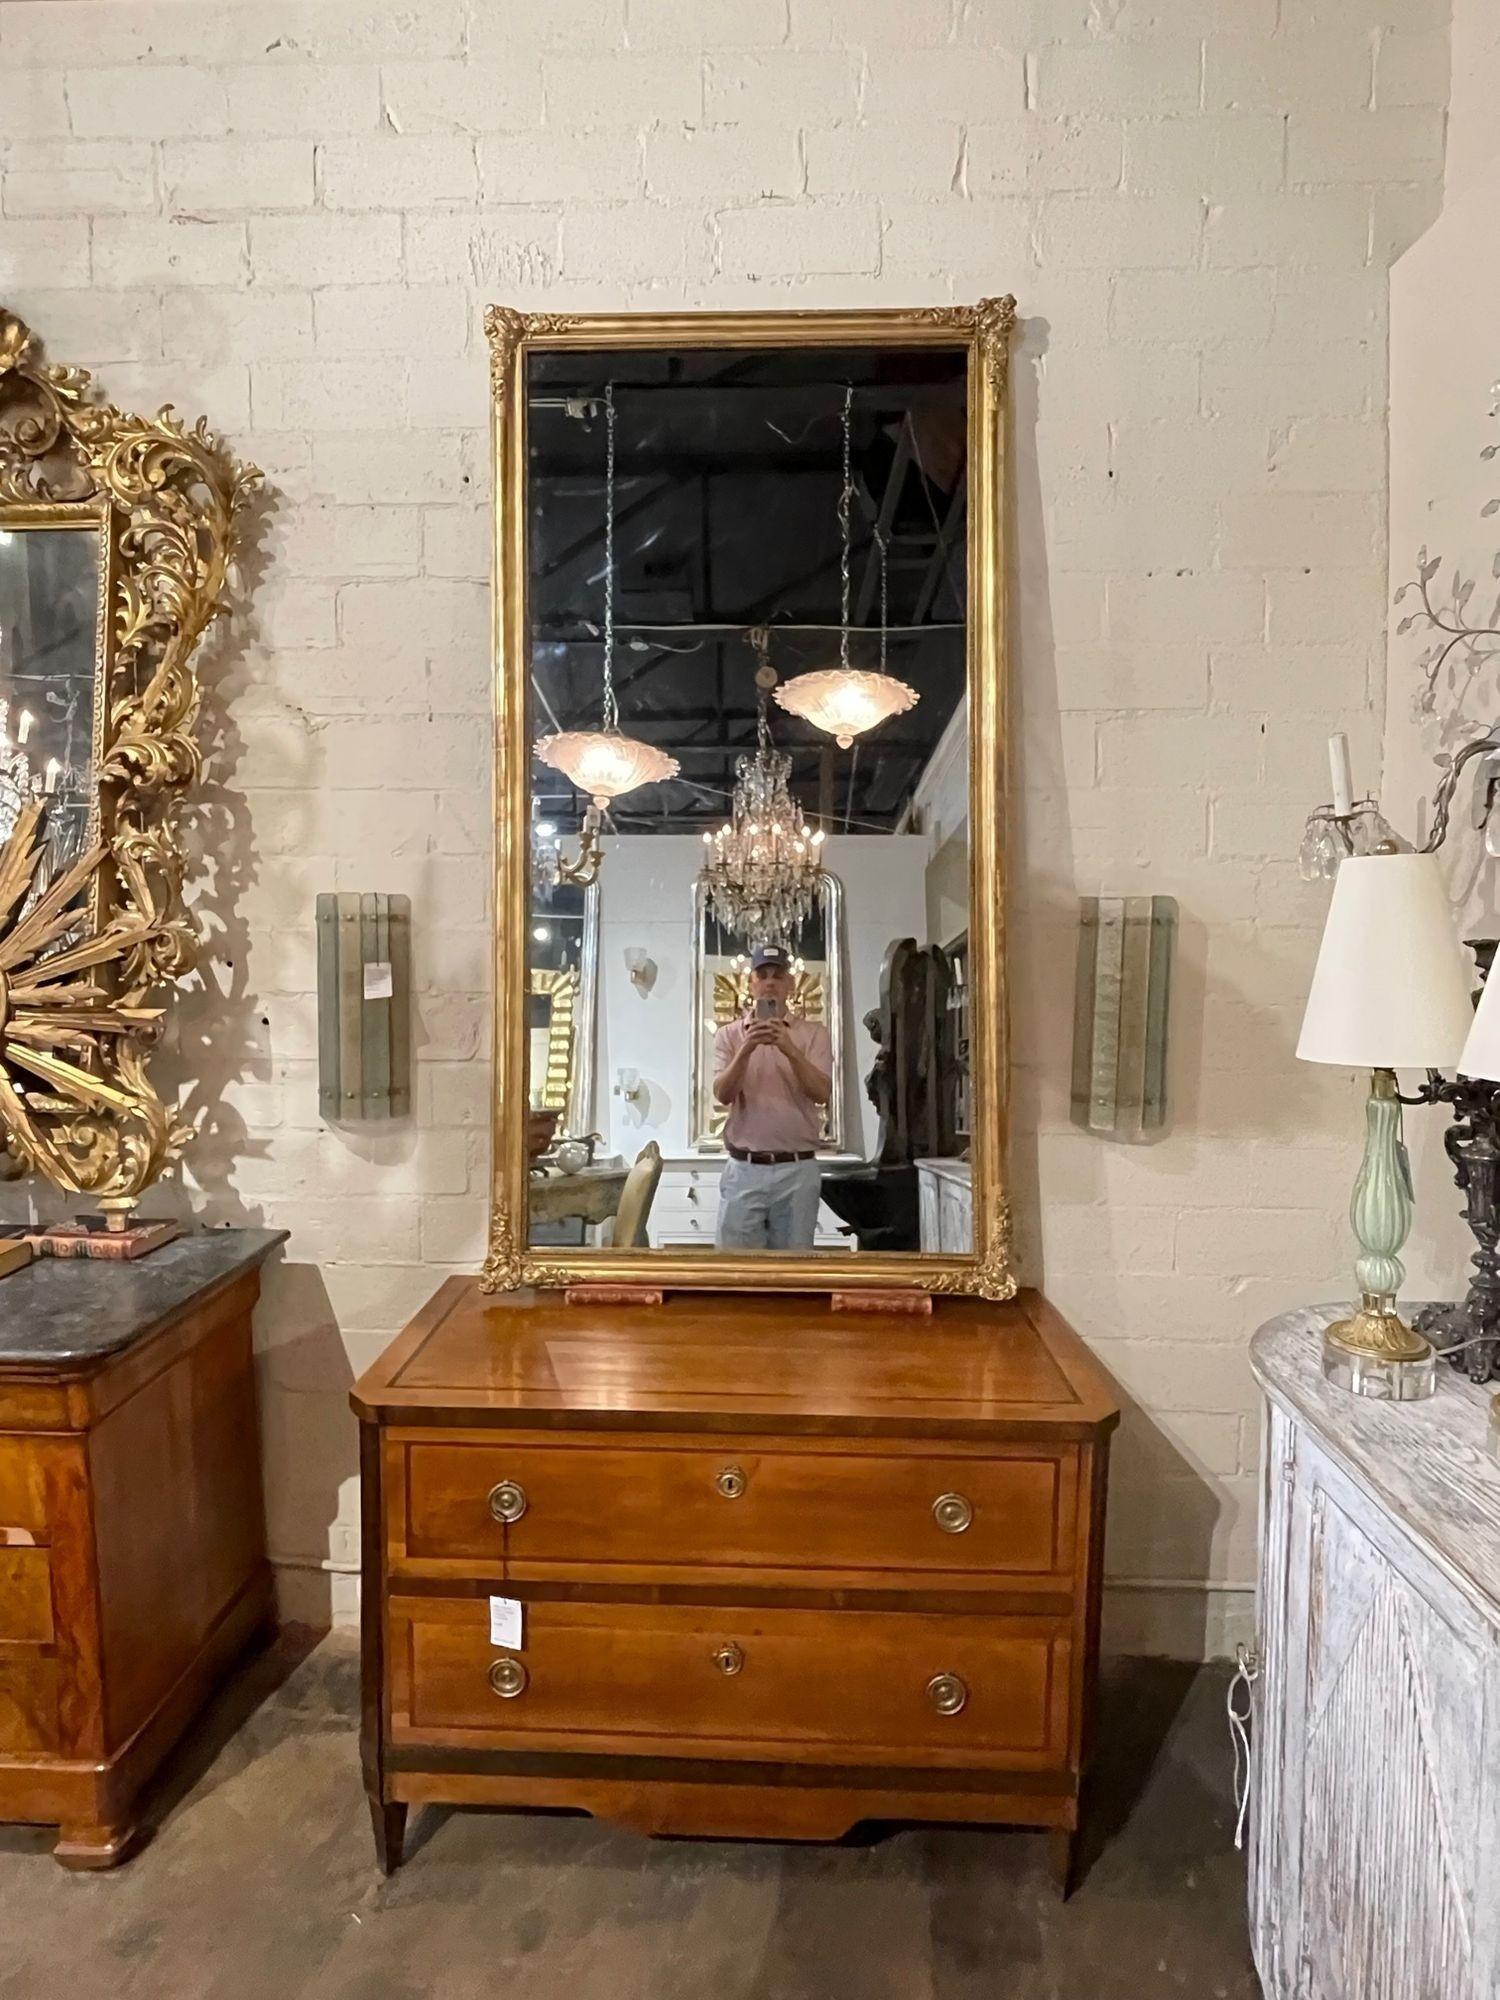 Pair of late 19th century transitional gilt-wood mirrors. Circa 1890. Adds warmth and charm to any room!